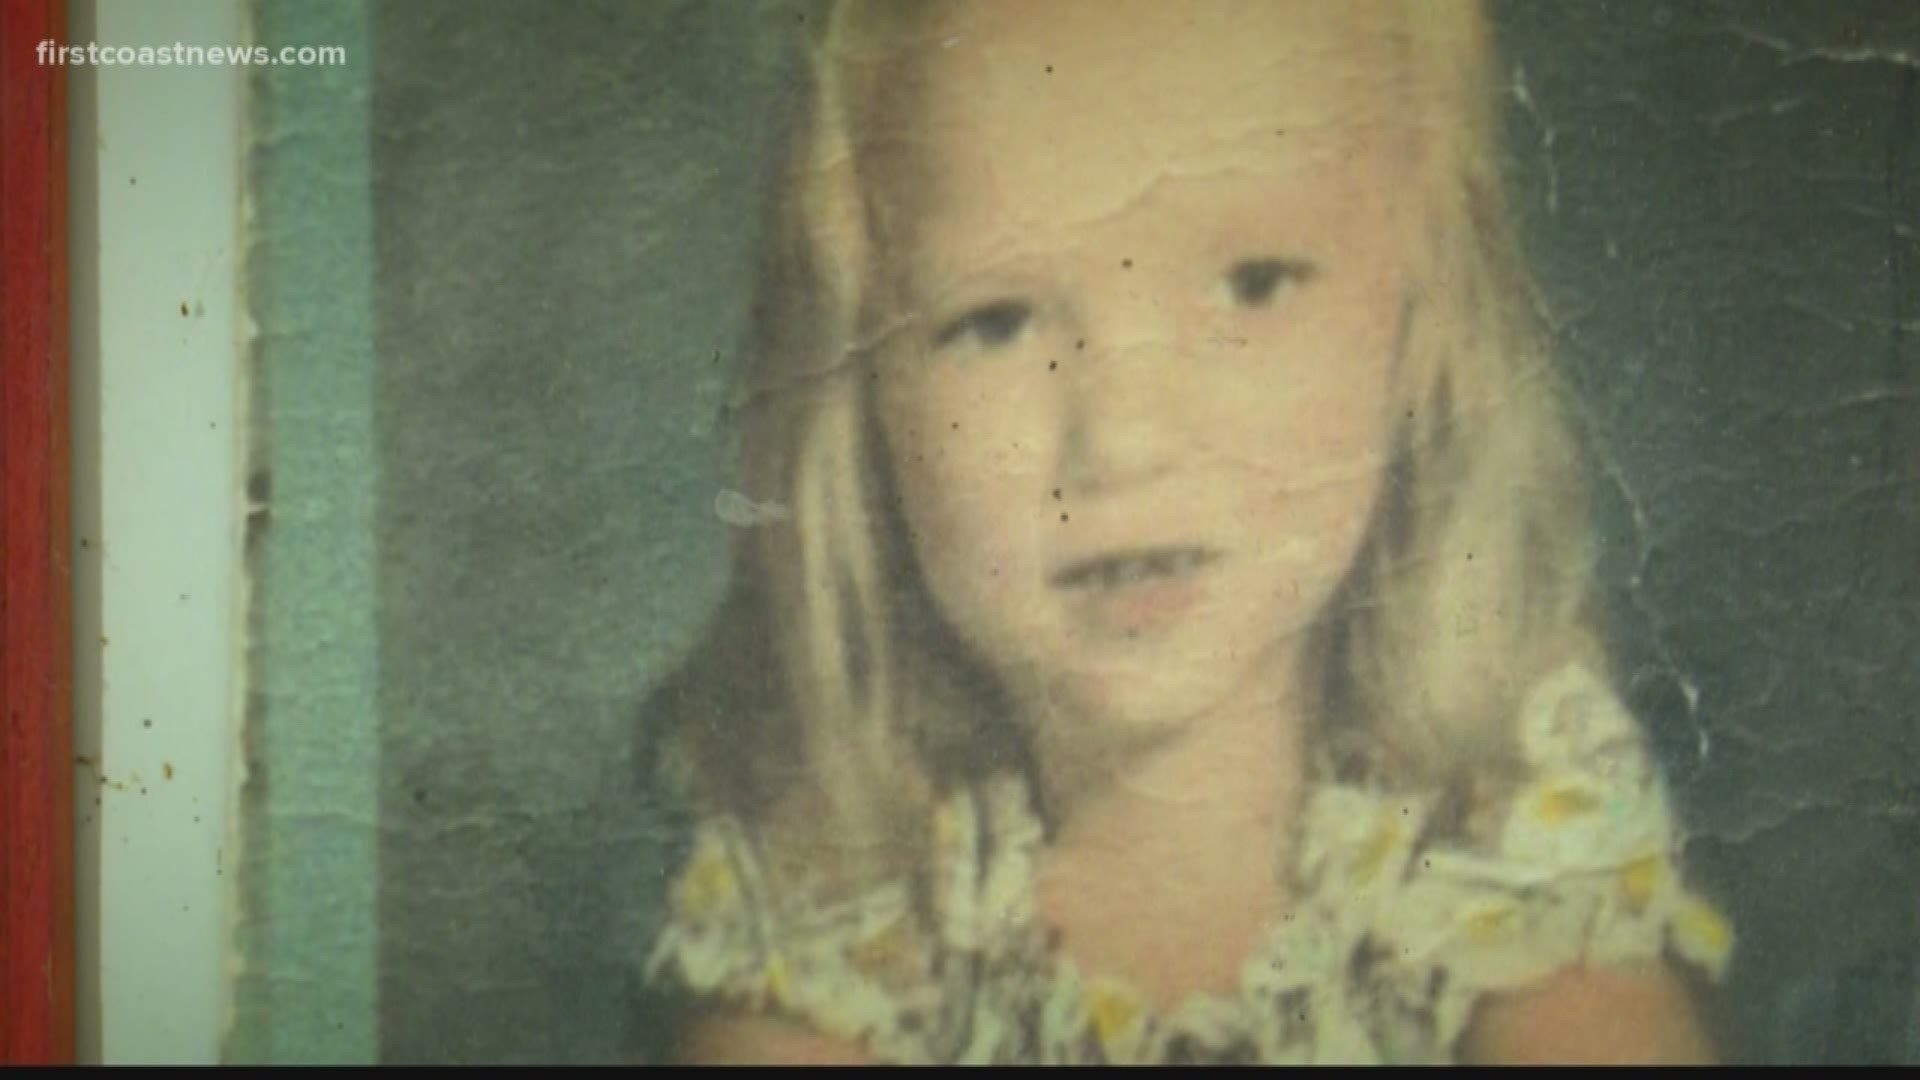 The Anderson sisters are two of the five girls who disappeared in five months in the 1970s.